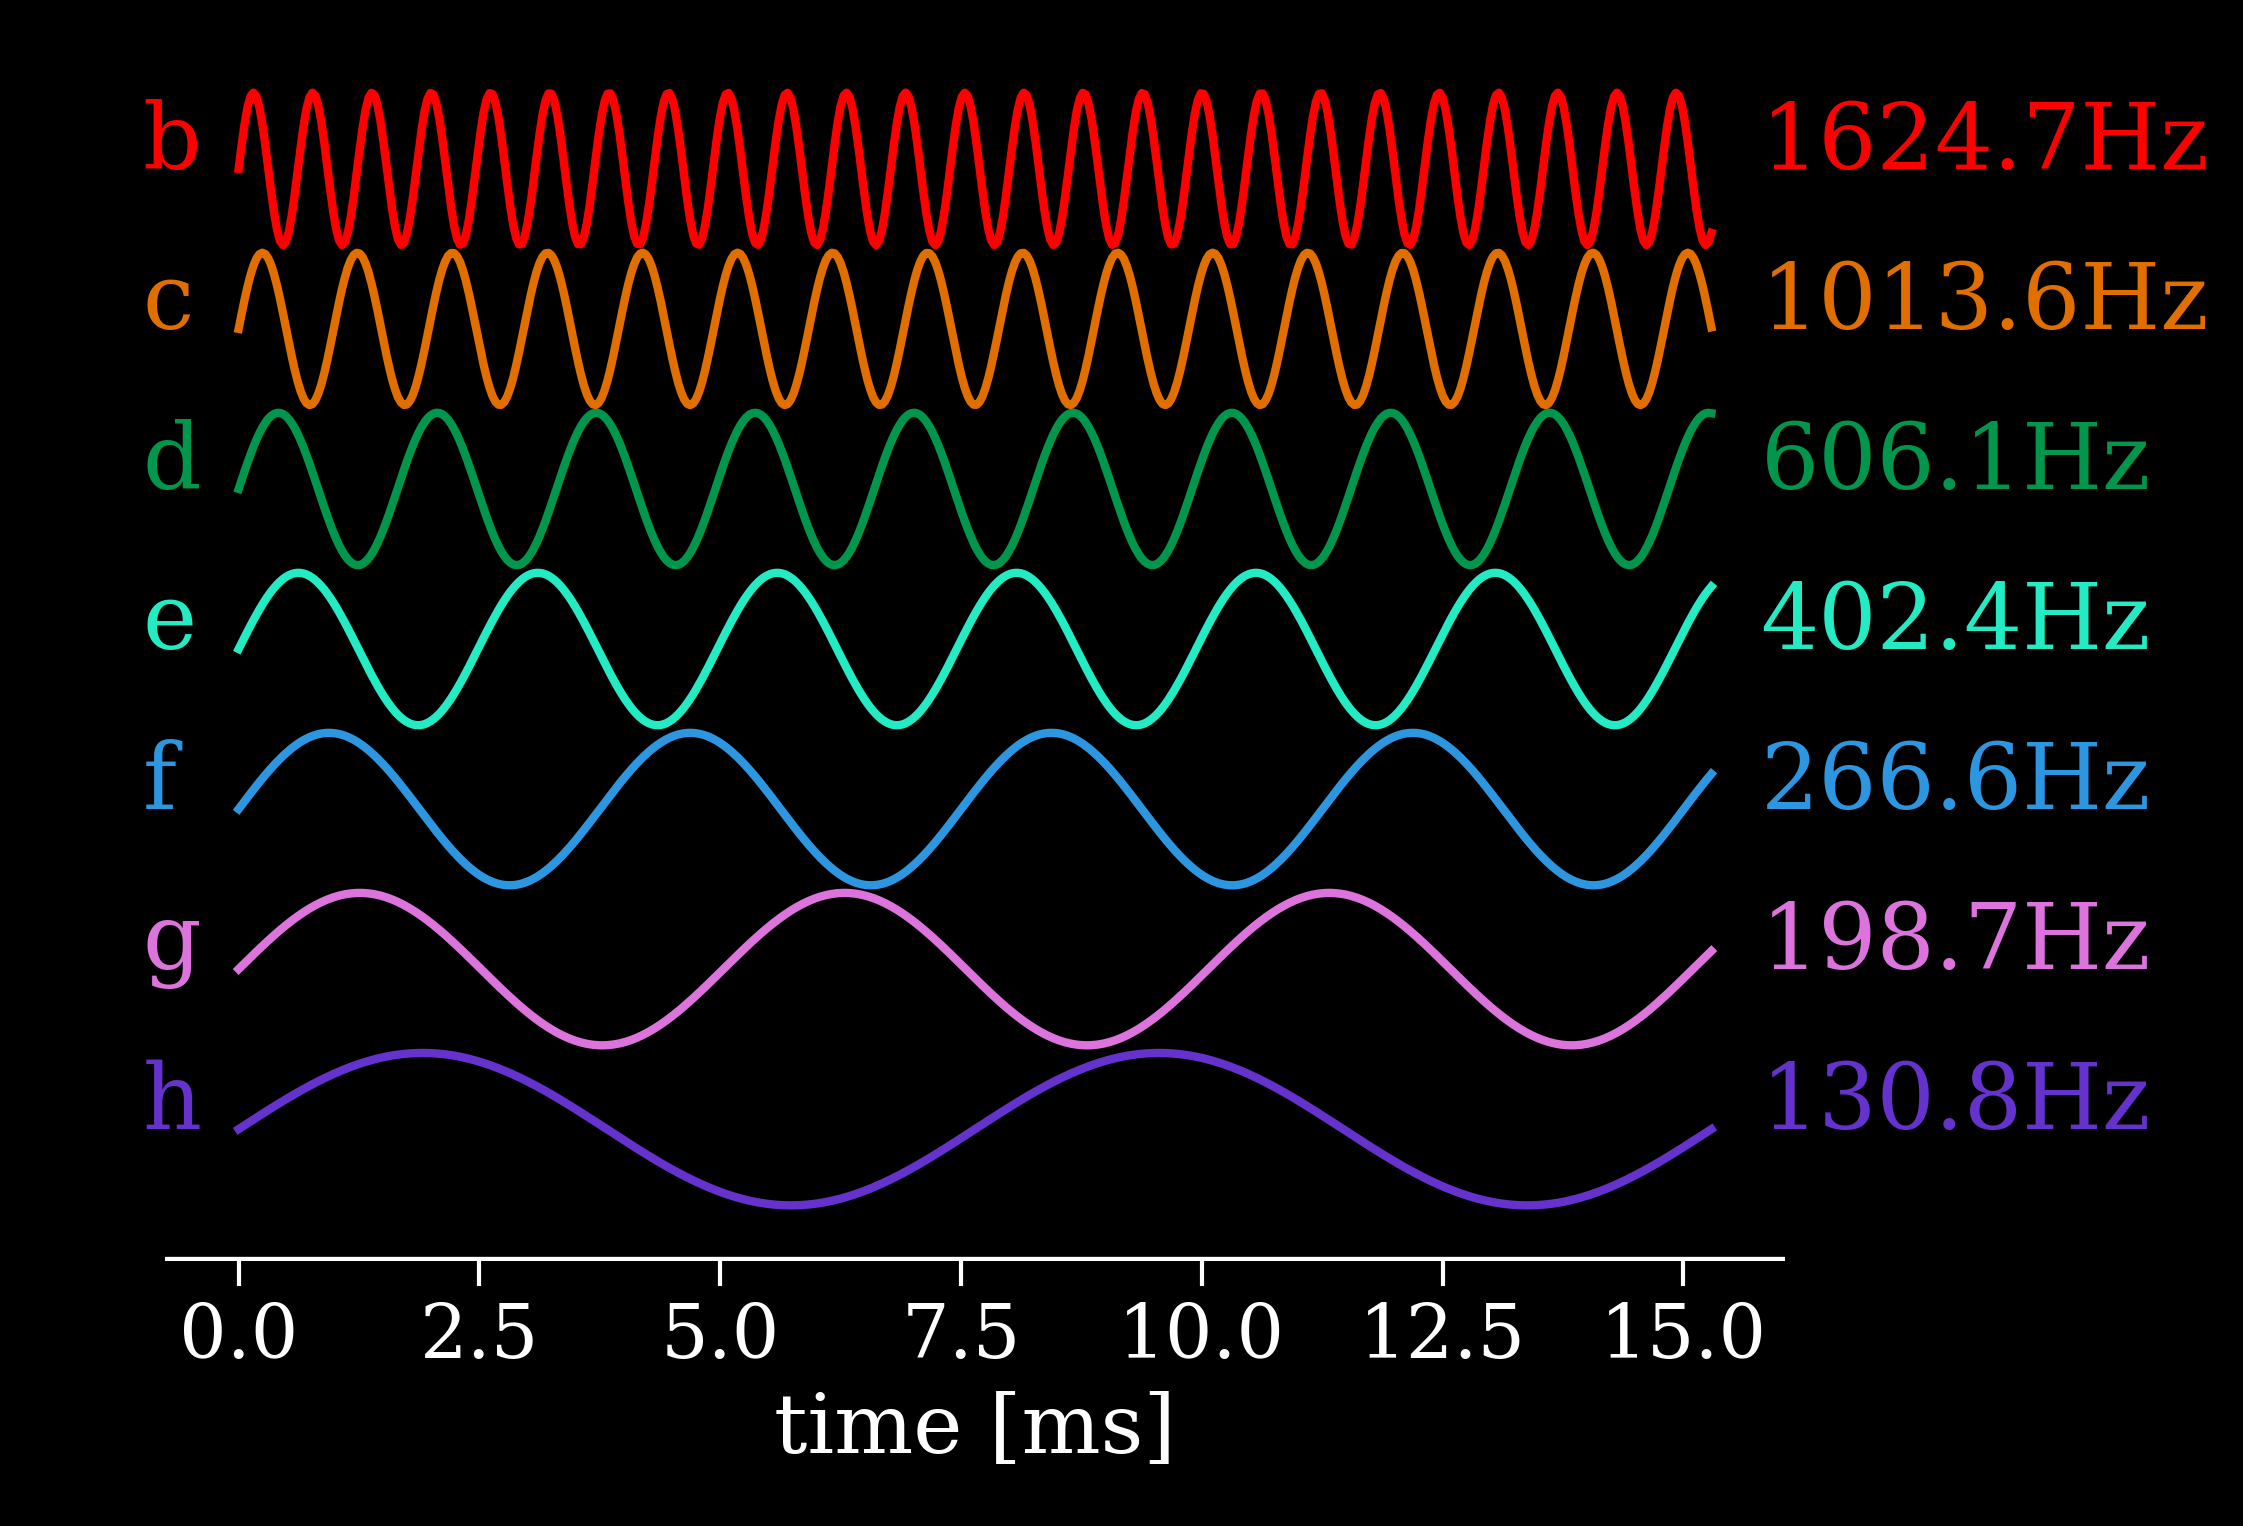 Sound waves with frequencies determined by scaling the planets' orbital frequencies into the human hearing range. We set the outermost planet to a C note (130.81 Hz) and let physics do the rest. You can also see the resonances here, for example, 3 full wavelengths of planet g occur for every 2 wavelengths of planet h. Letters on left of image refer to planet names, not note names.